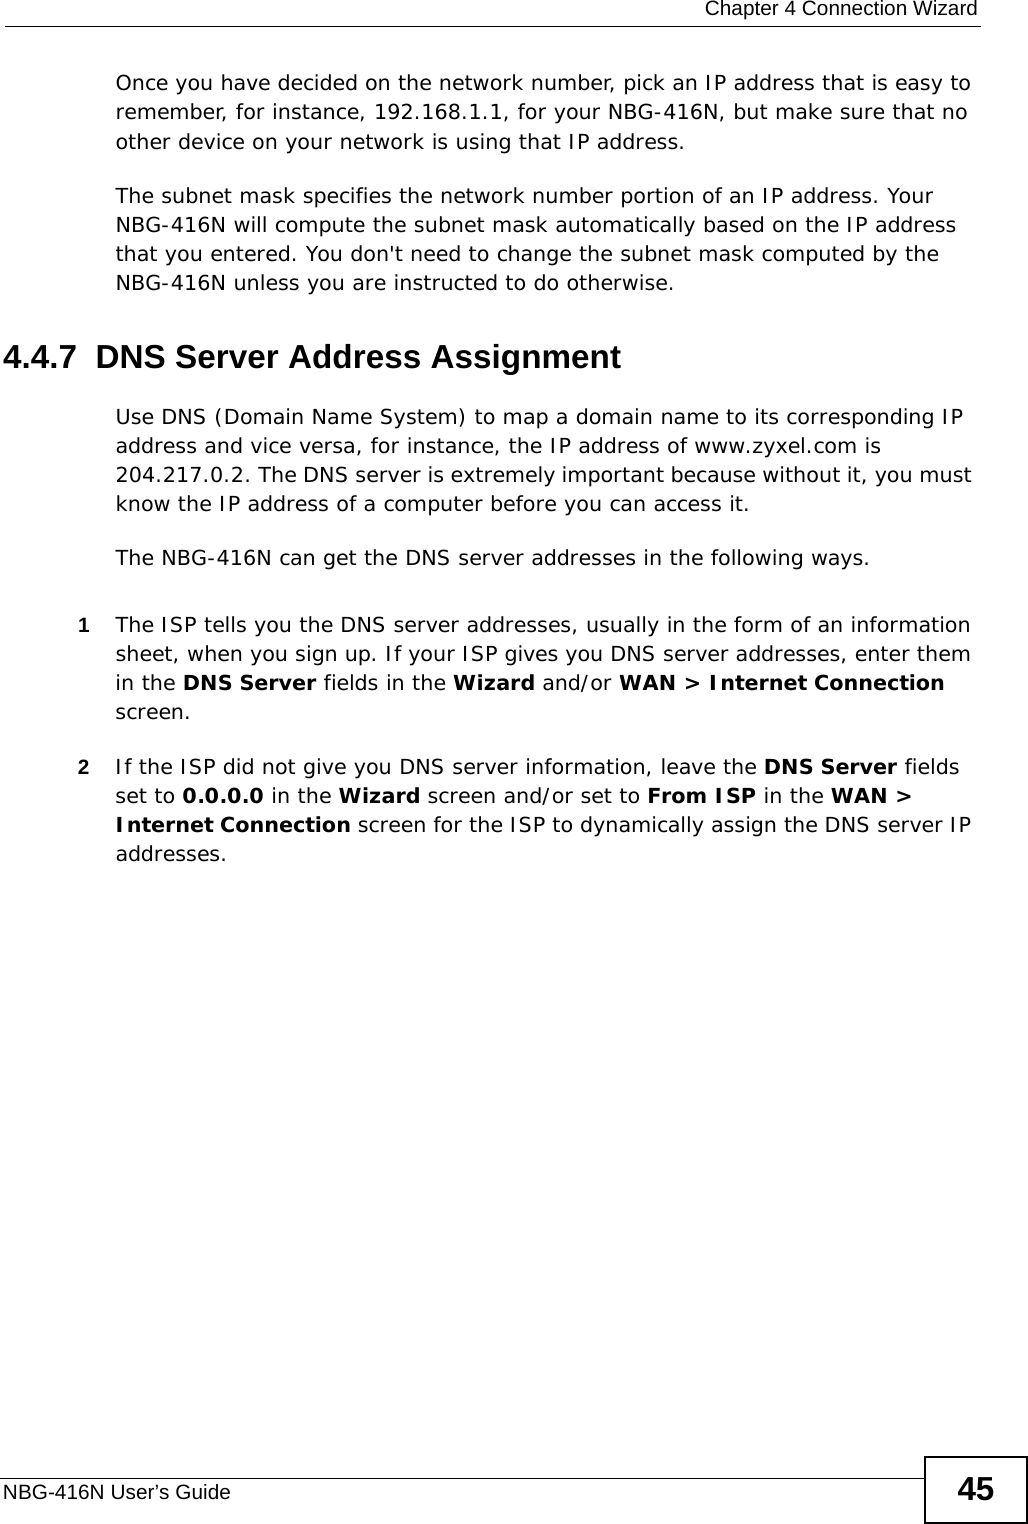  Chapter 4 Connection WizardNBG-416N User’s Guide 45Once you have decided on the network number, pick an IP address that is easy to remember, for instance, 192.168.1.1, for your NBG-416N, but make sure that no other device on your network is using that IP address.The subnet mask specifies the network number portion of an IP address. Your NBG-416N will compute the subnet mask automatically based on the IP address that you entered. You don&apos;t need to change the subnet mask computed by the NBG-416N unless you are instructed to do otherwise.4.4.7  DNS Server Address AssignmentUse DNS (Domain Name System) to map a domain name to its corresponding IP address and vice versa, for instance, the IP address of www.zyxel.com is 204.217.0.2. The DNS server is extremely important because without it, you must know the IP address of a computer before you can access it. The NBG-416N can get the DNS server addresses in the following ways.1The ISP tells you the DNS server addresses, usually in the form of an information sheet, when you sign up. If your ISP gives you DNS server addresses, enter them in the DNS Server fields in the Wizard and/or WAN &gt; Internet Connection screen.2If the ISP did not give you DNS server information, leave the DNS Server fields set to 0.0.0.0 in the Wizard screen and/or set to From ISP in the WAN &gt; Internet Connection screen for the ISP to dynamically assign the DNS server IP addresses.